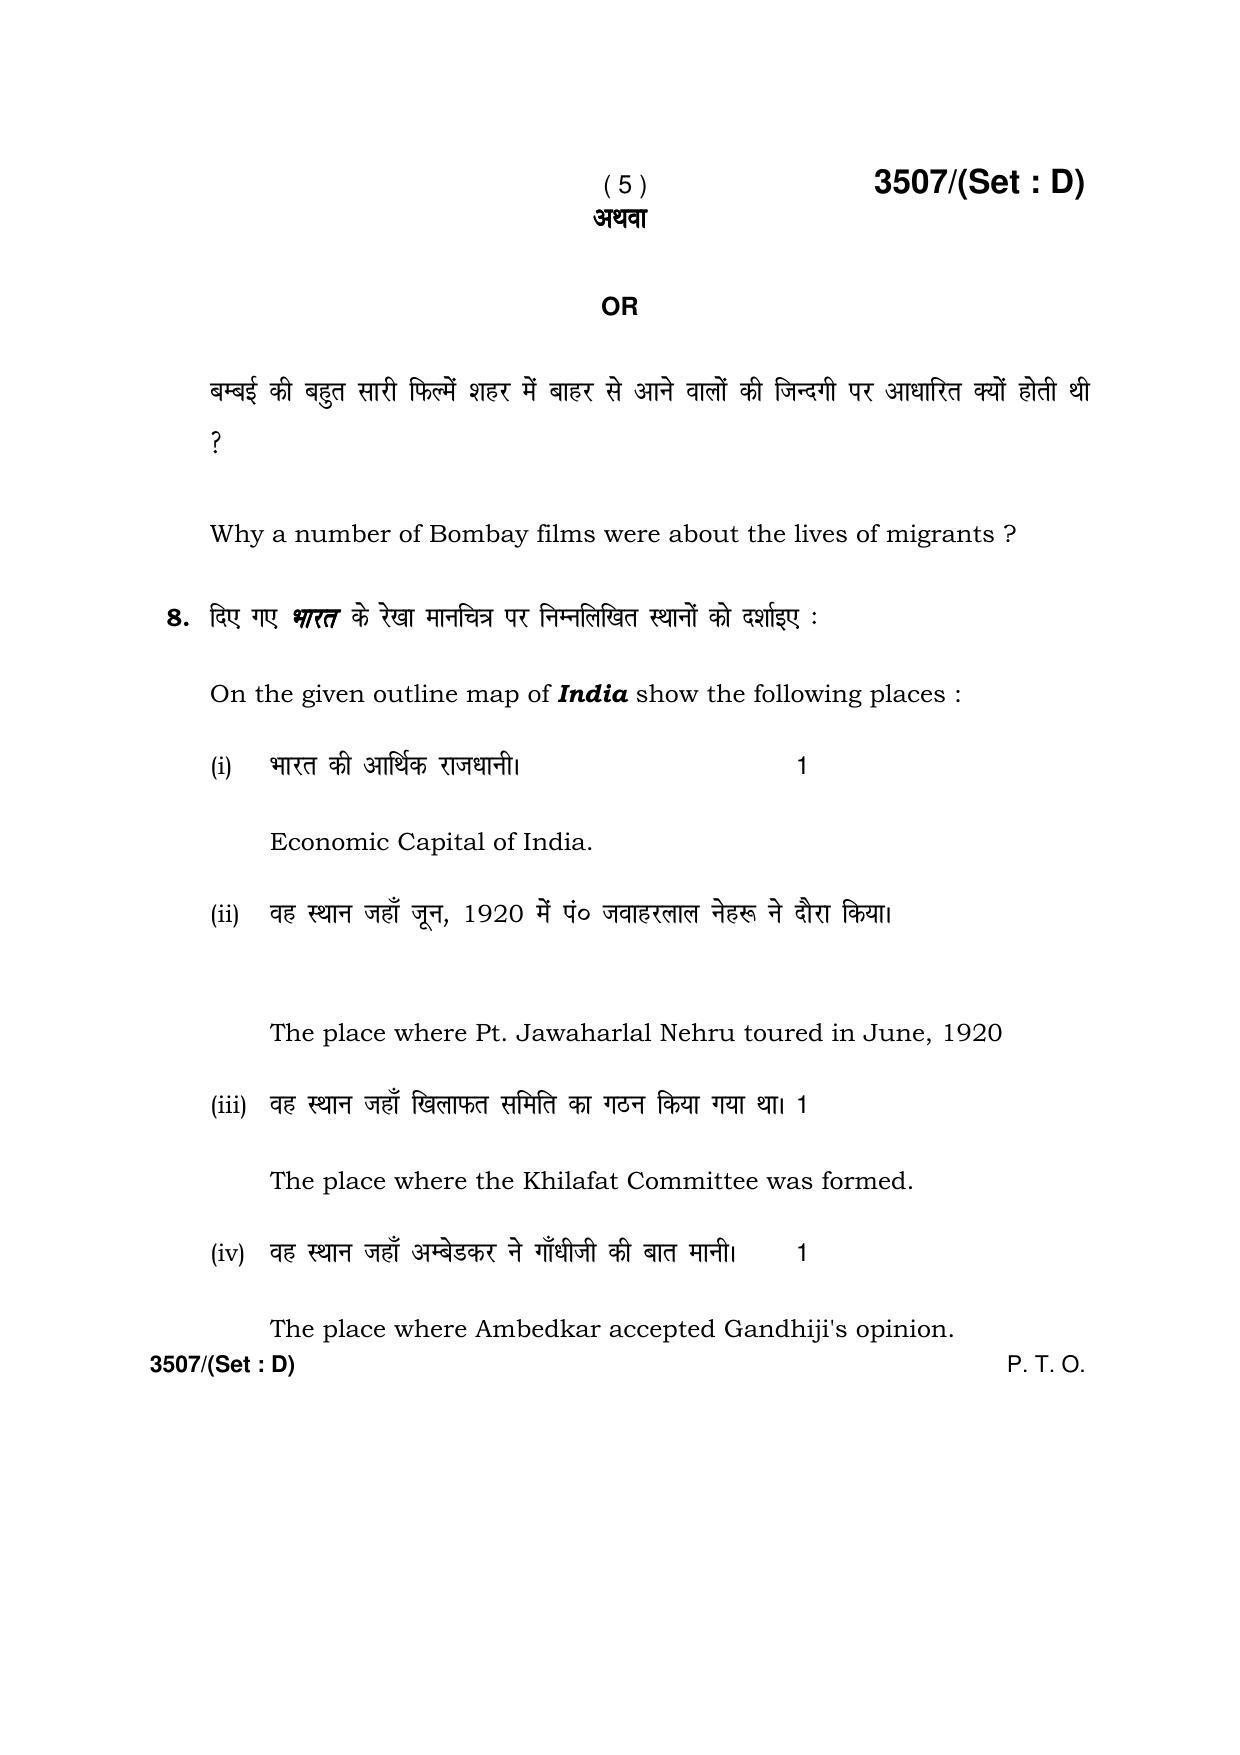 Haryana Board HBSE Class 10 Social Science -D 2018 Question Paper - Page 5